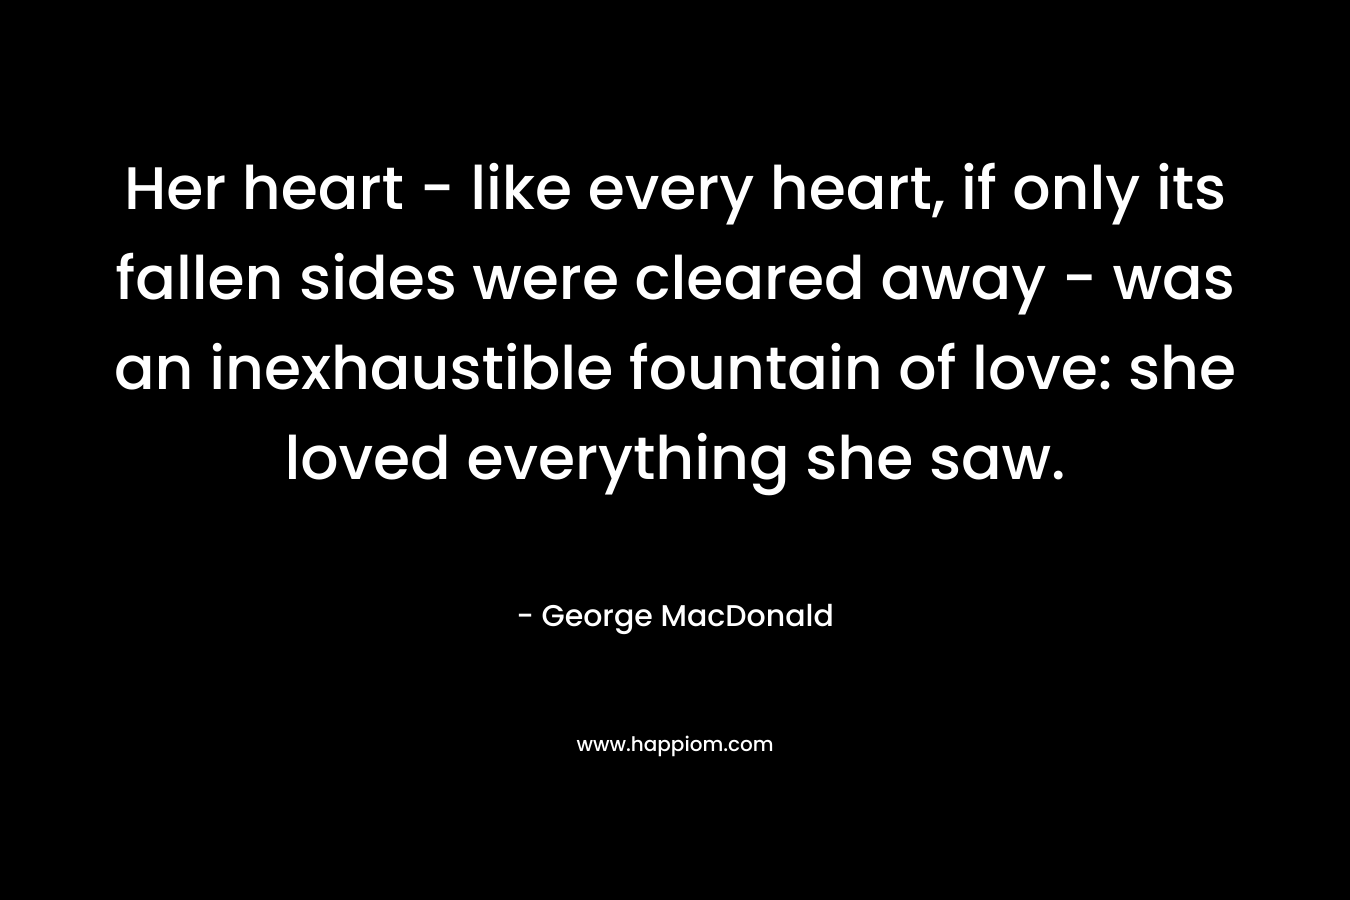 Her heart - like every heart, if only its fallen sides were cleared away - was an inexhaustible fountain of love: she loved everything she saw. 